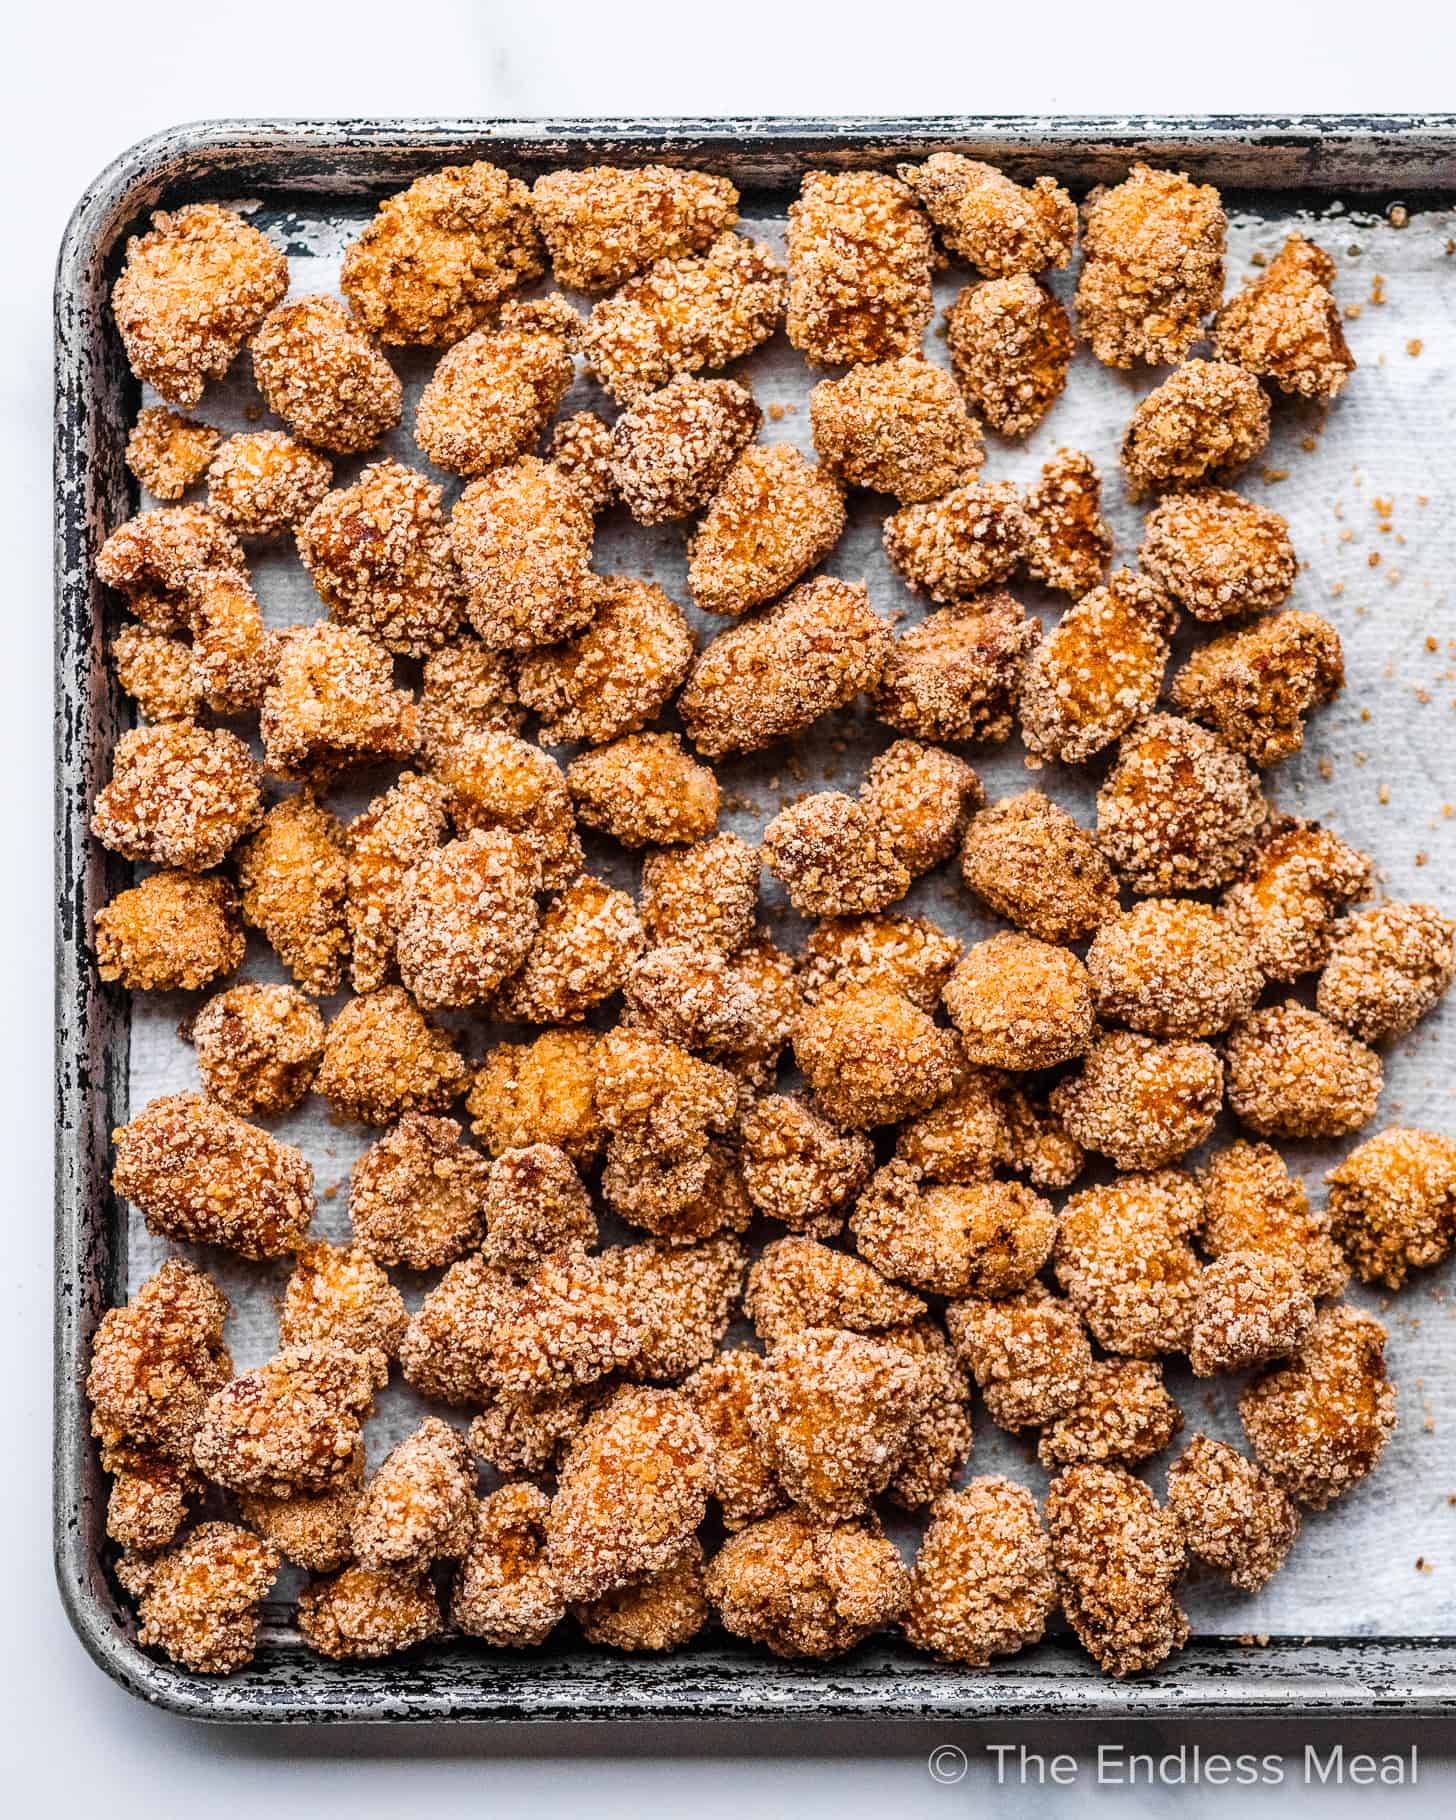 Fried Chicken Bites on a paper towel lined baking sheet.